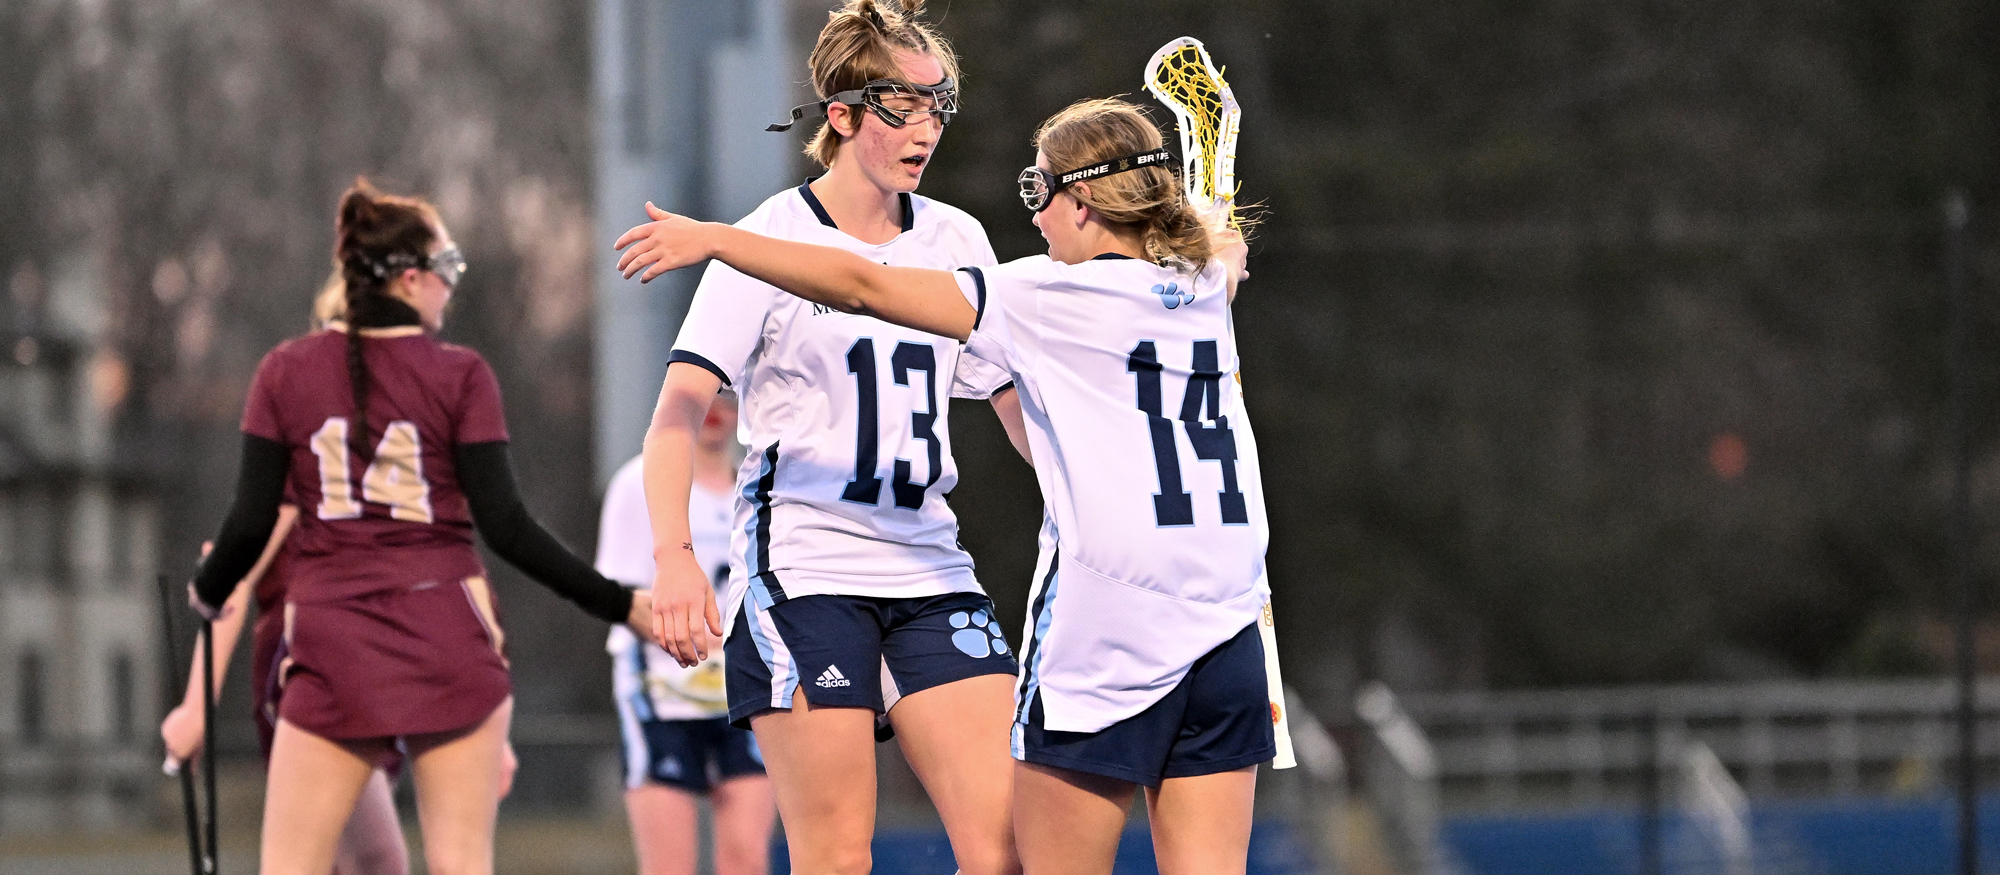 Amelia Knaysi (left) scored two goals with seven ground balls and three caused turnovers, and Emi Bisson (right) scored her 40th goal of the season in Mount Holyoke's loss at Coast Guard on April 19, 2023. (RJB Sports file photo)